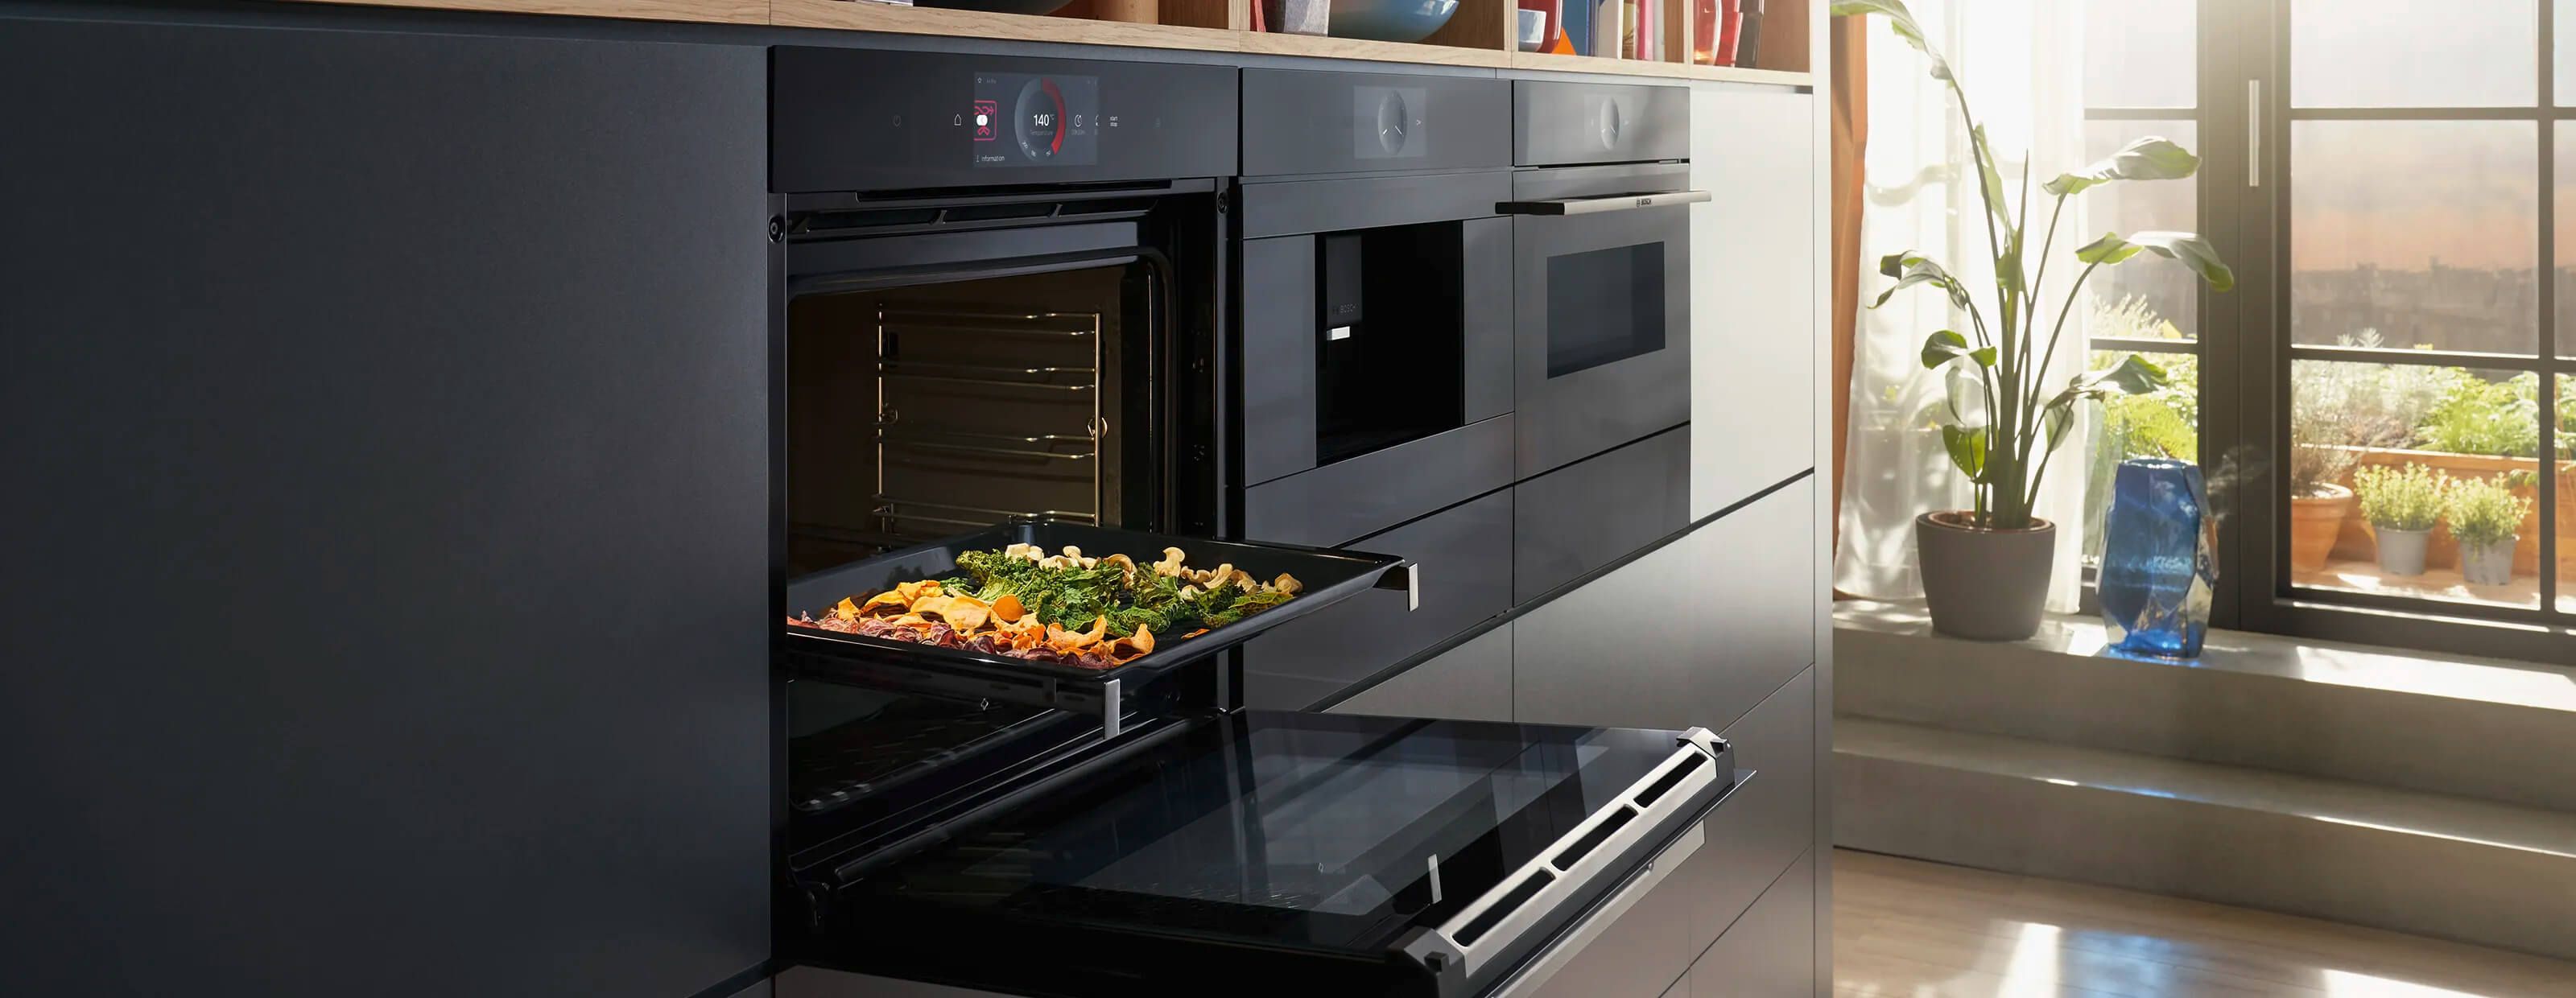 Bosch Series 8 smart oven in an apartment with a healthy vegetable dish, showcasing innovative cooking technology in a stylish home environment